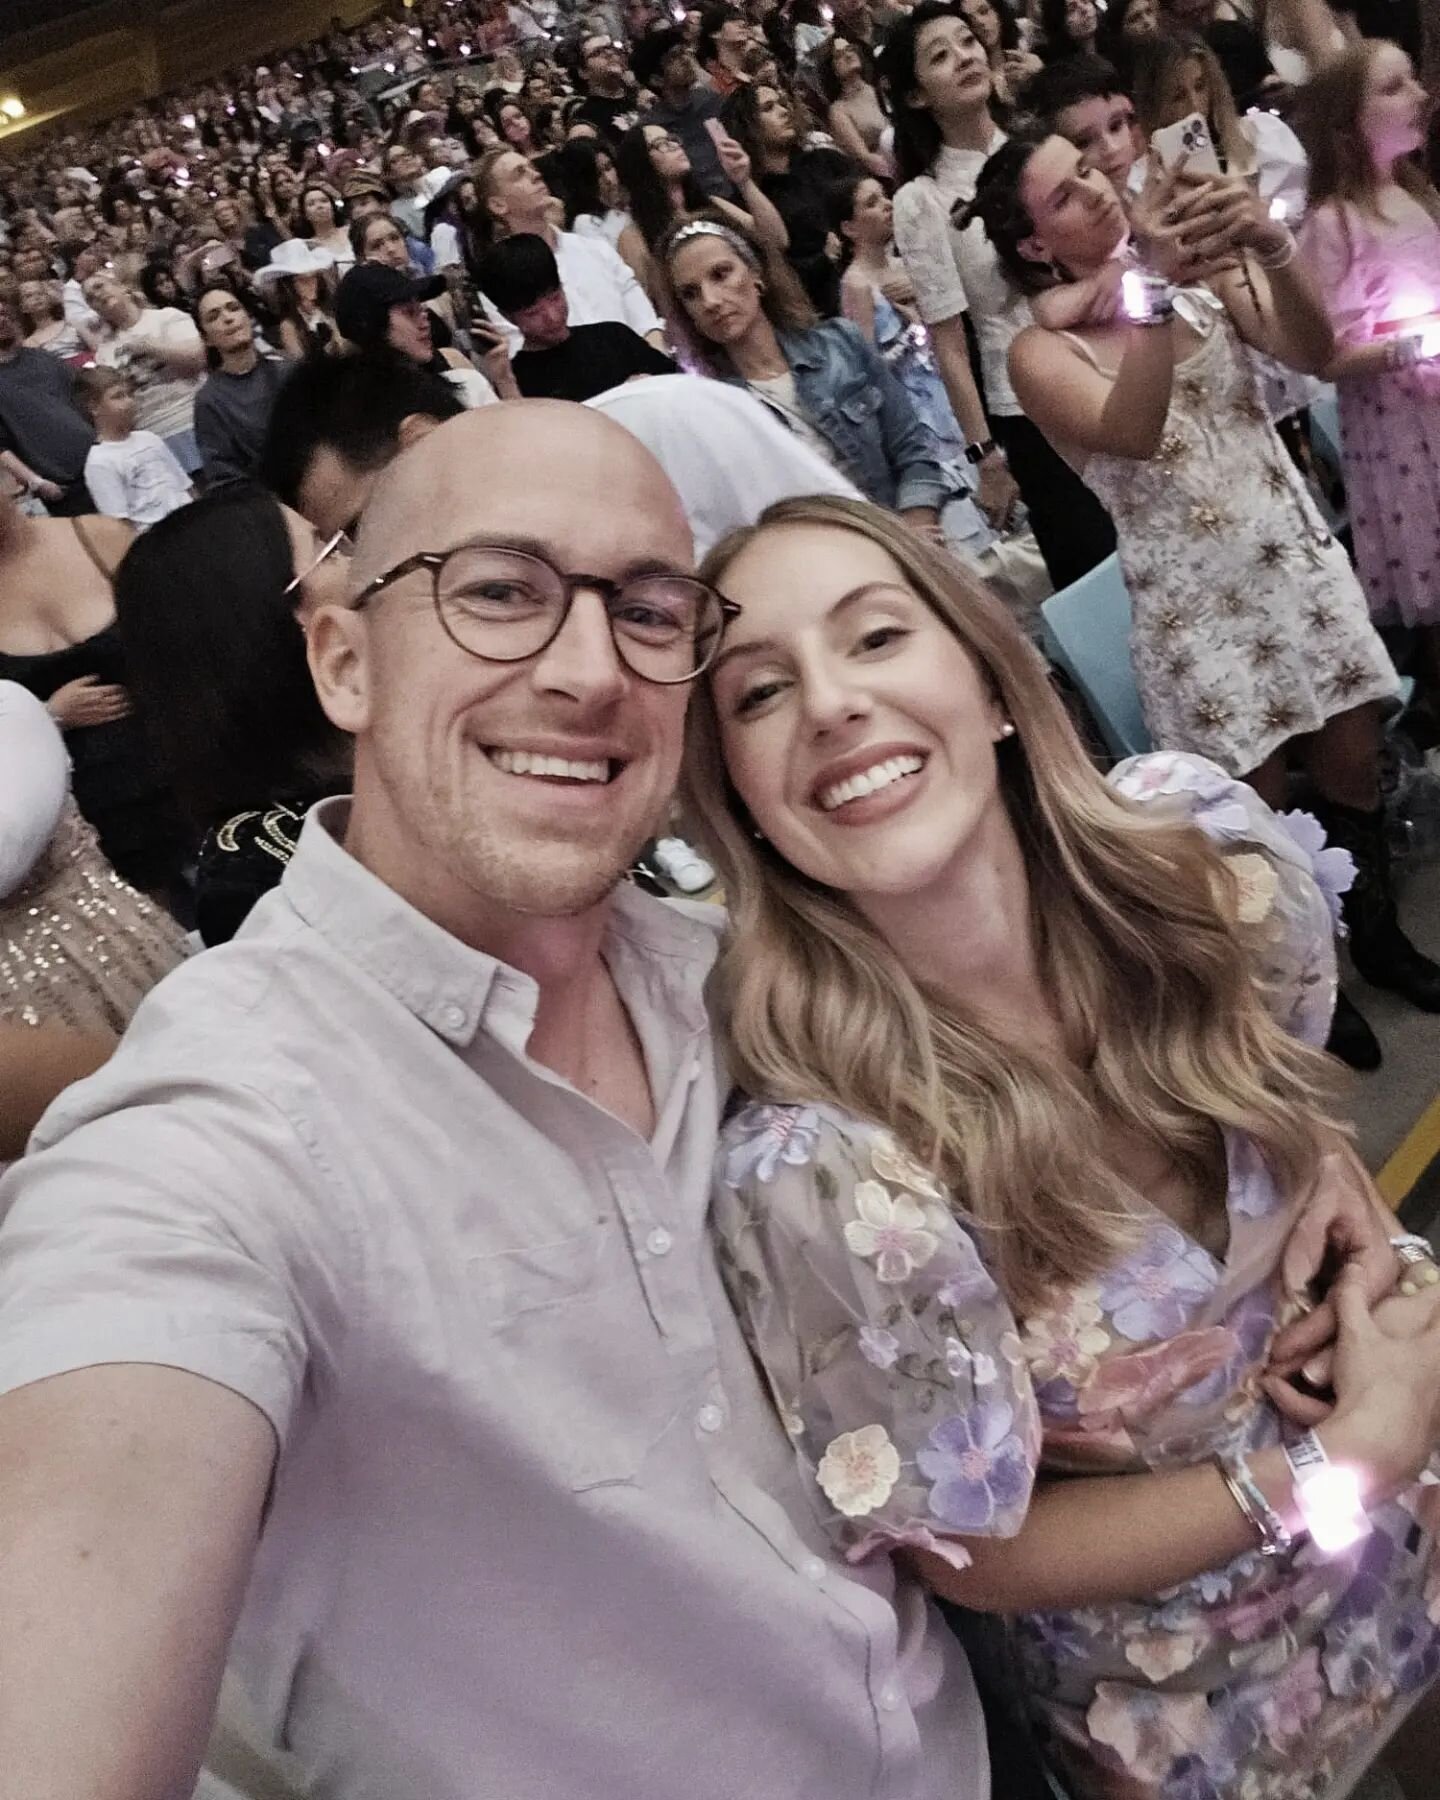 'This night is sparkling, don't you let it go...' @taylorswift @lacht_ ✨️✨️✨️